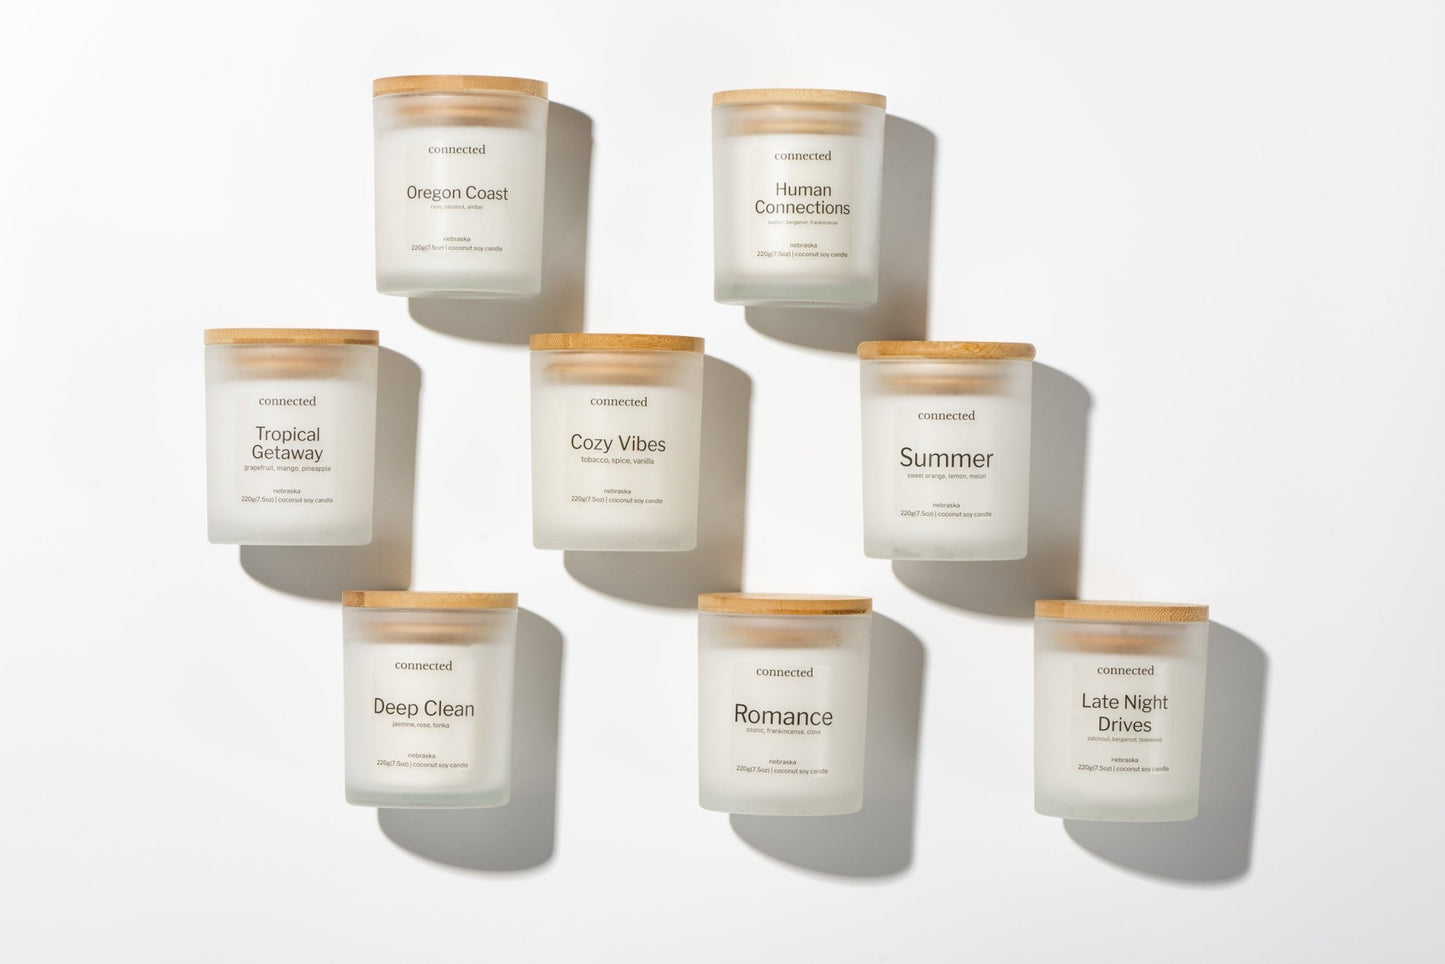 Summer -Coconut soy candle - Connected Fragrance Company - Connected Fragrance Company